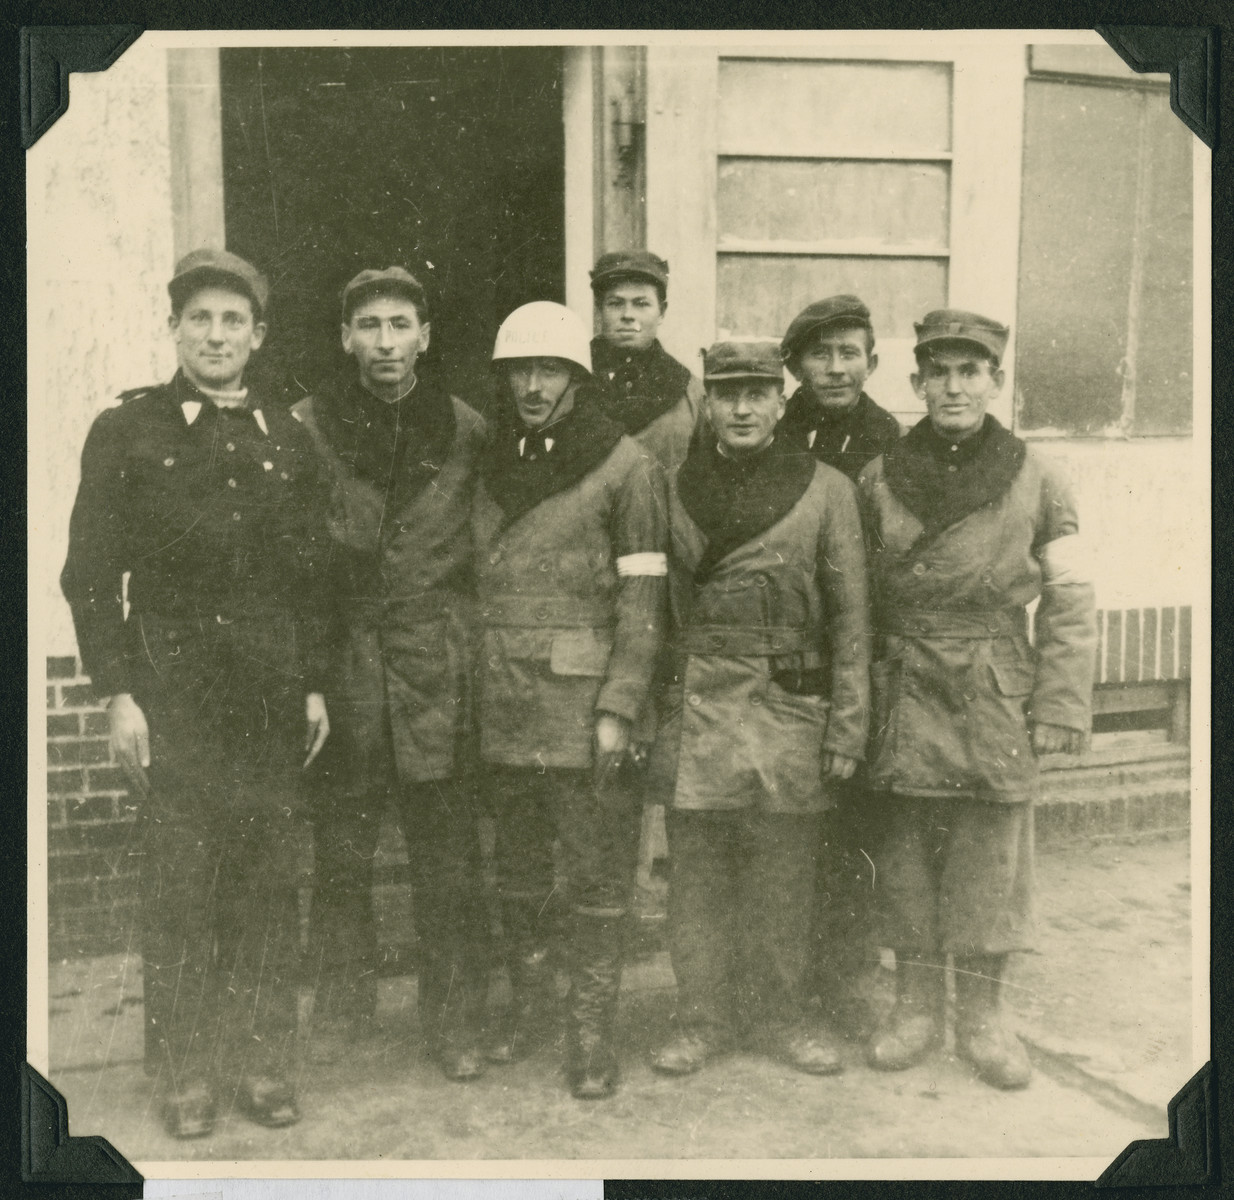 Group portrait of men, including Jewish police, in the Wetzlar displaced persons camp.